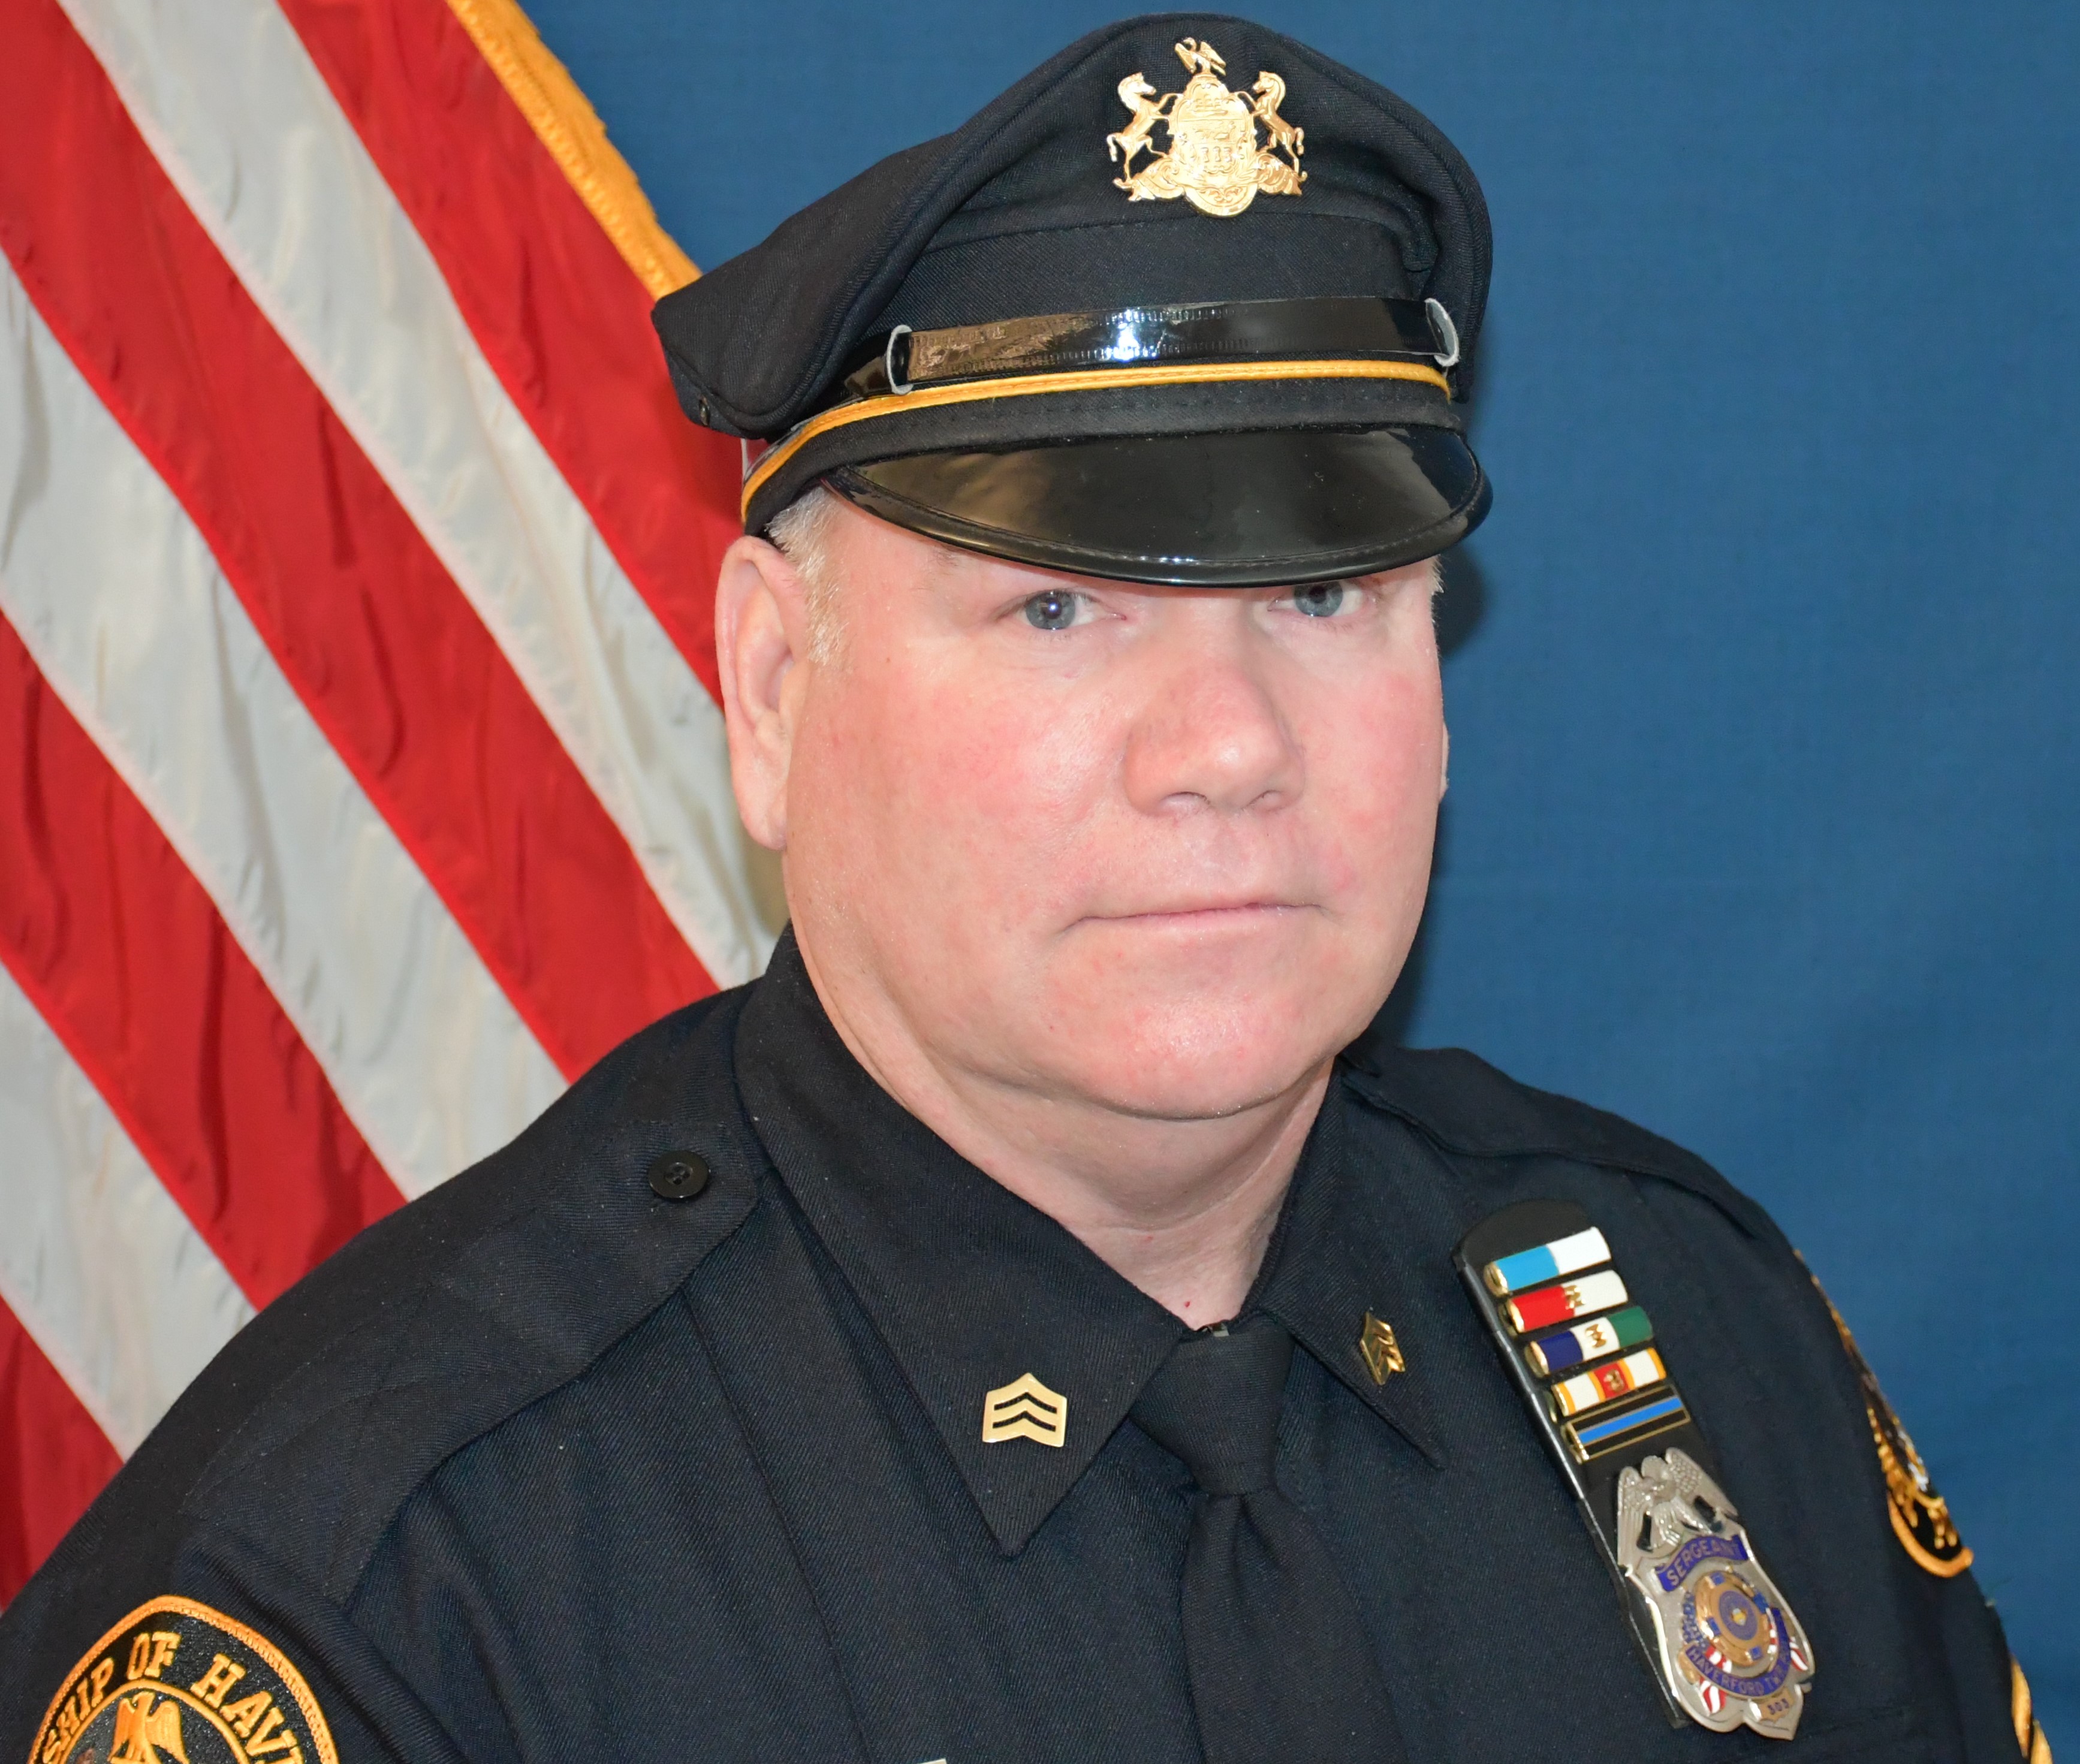 Sergeant Kevin D. Redding | Haverford Township Police Department, Pennsylvania